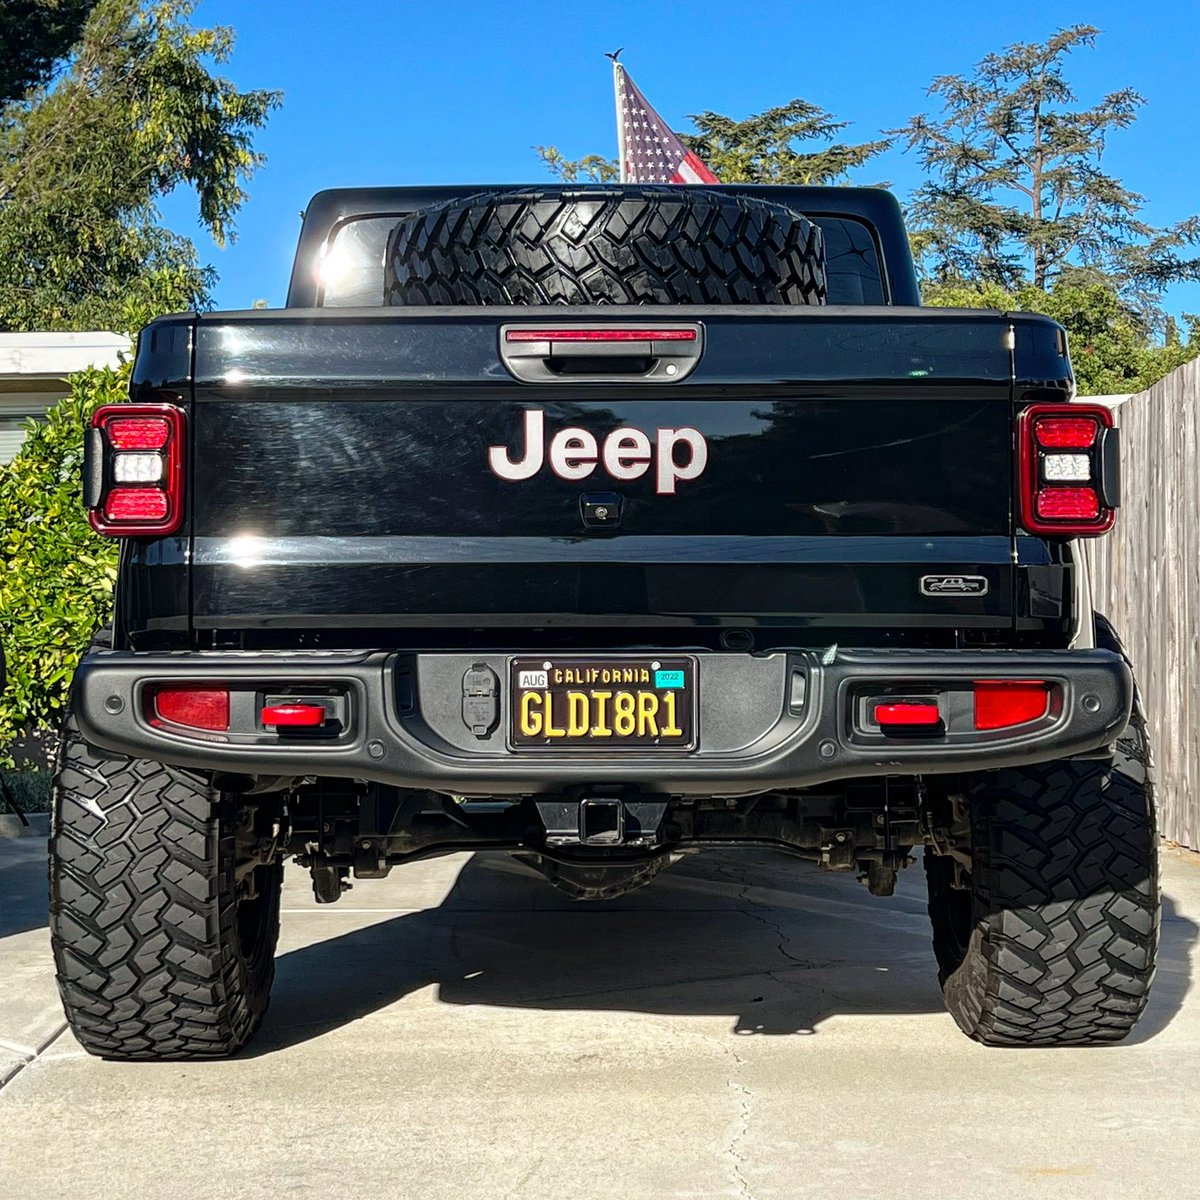 Full size spare adjustable rear tire carrier  #rearview #datass #tailgatetuesday @DV8_Offroad @Jeep @7SlotSociety @ItsaJeepWorld @THEJeepMafia @ReturnCheck @Thejeepboss @RowdyRep_99TJ @Jeep_Life @2fingeredsocie1 @RubiconExpress1